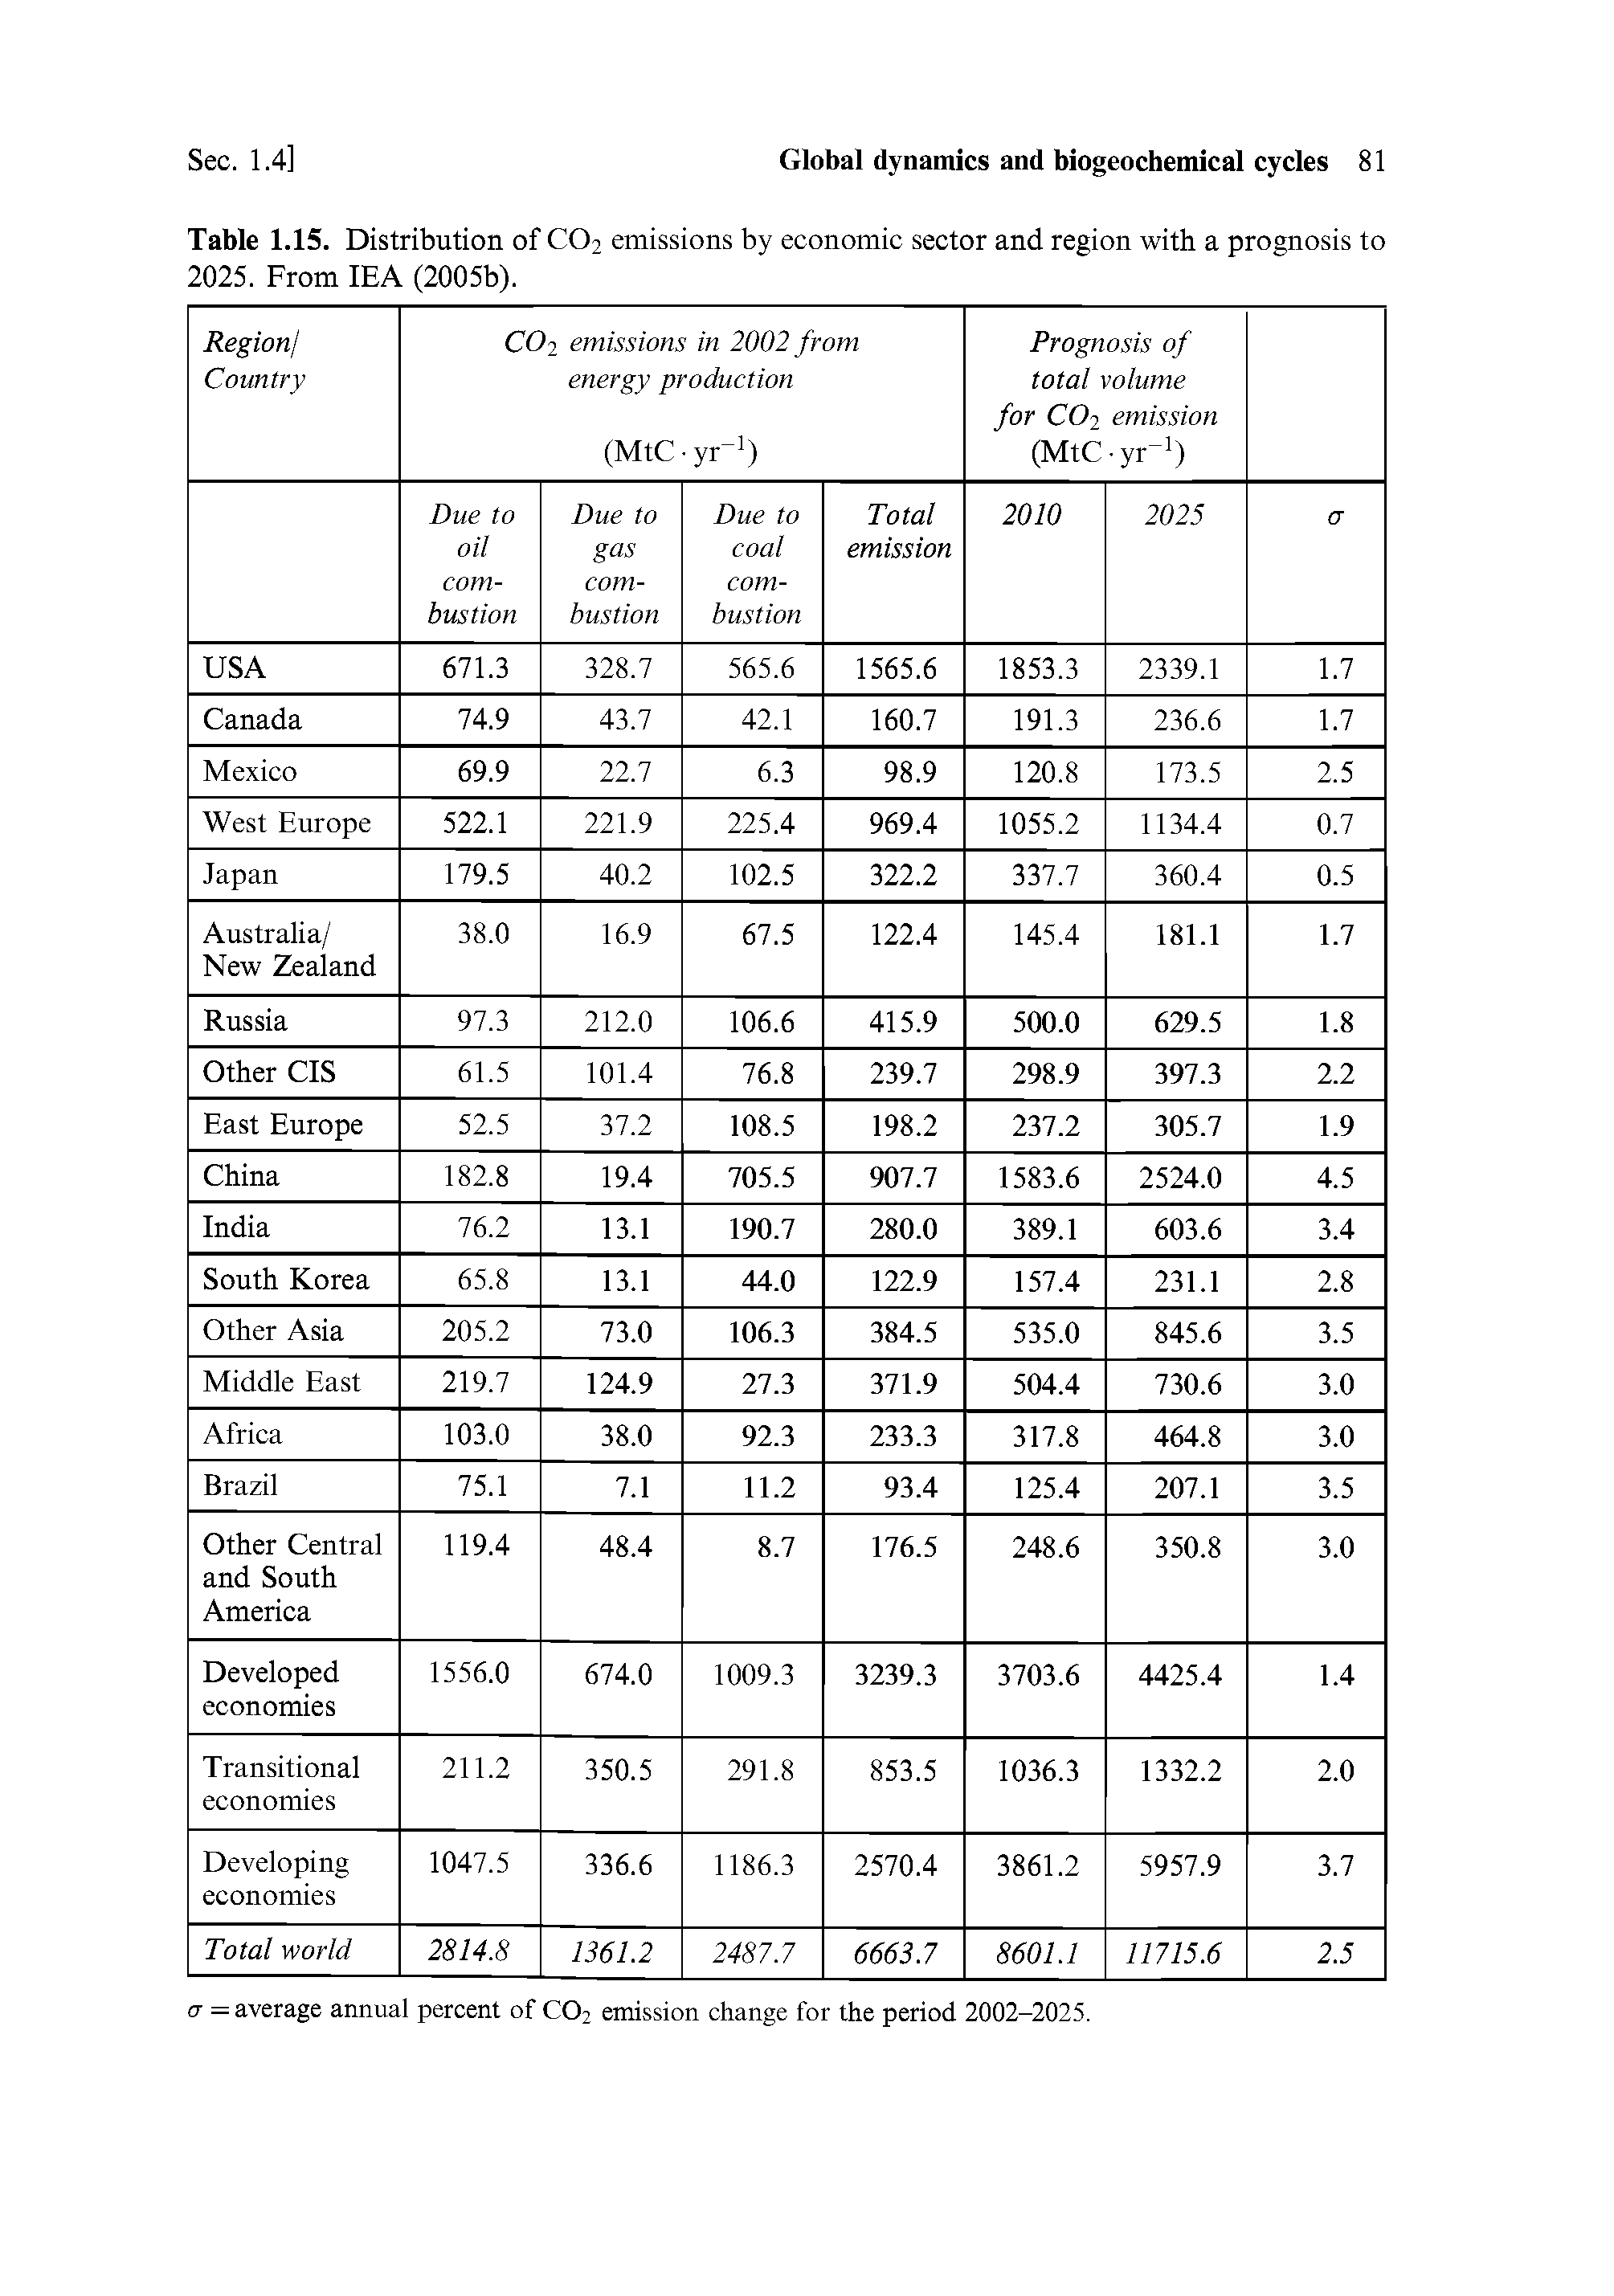 Table 1.15. Distribution of C02 emissions by economic sector and region with a prognosis to 2025. From IEA (2005b).